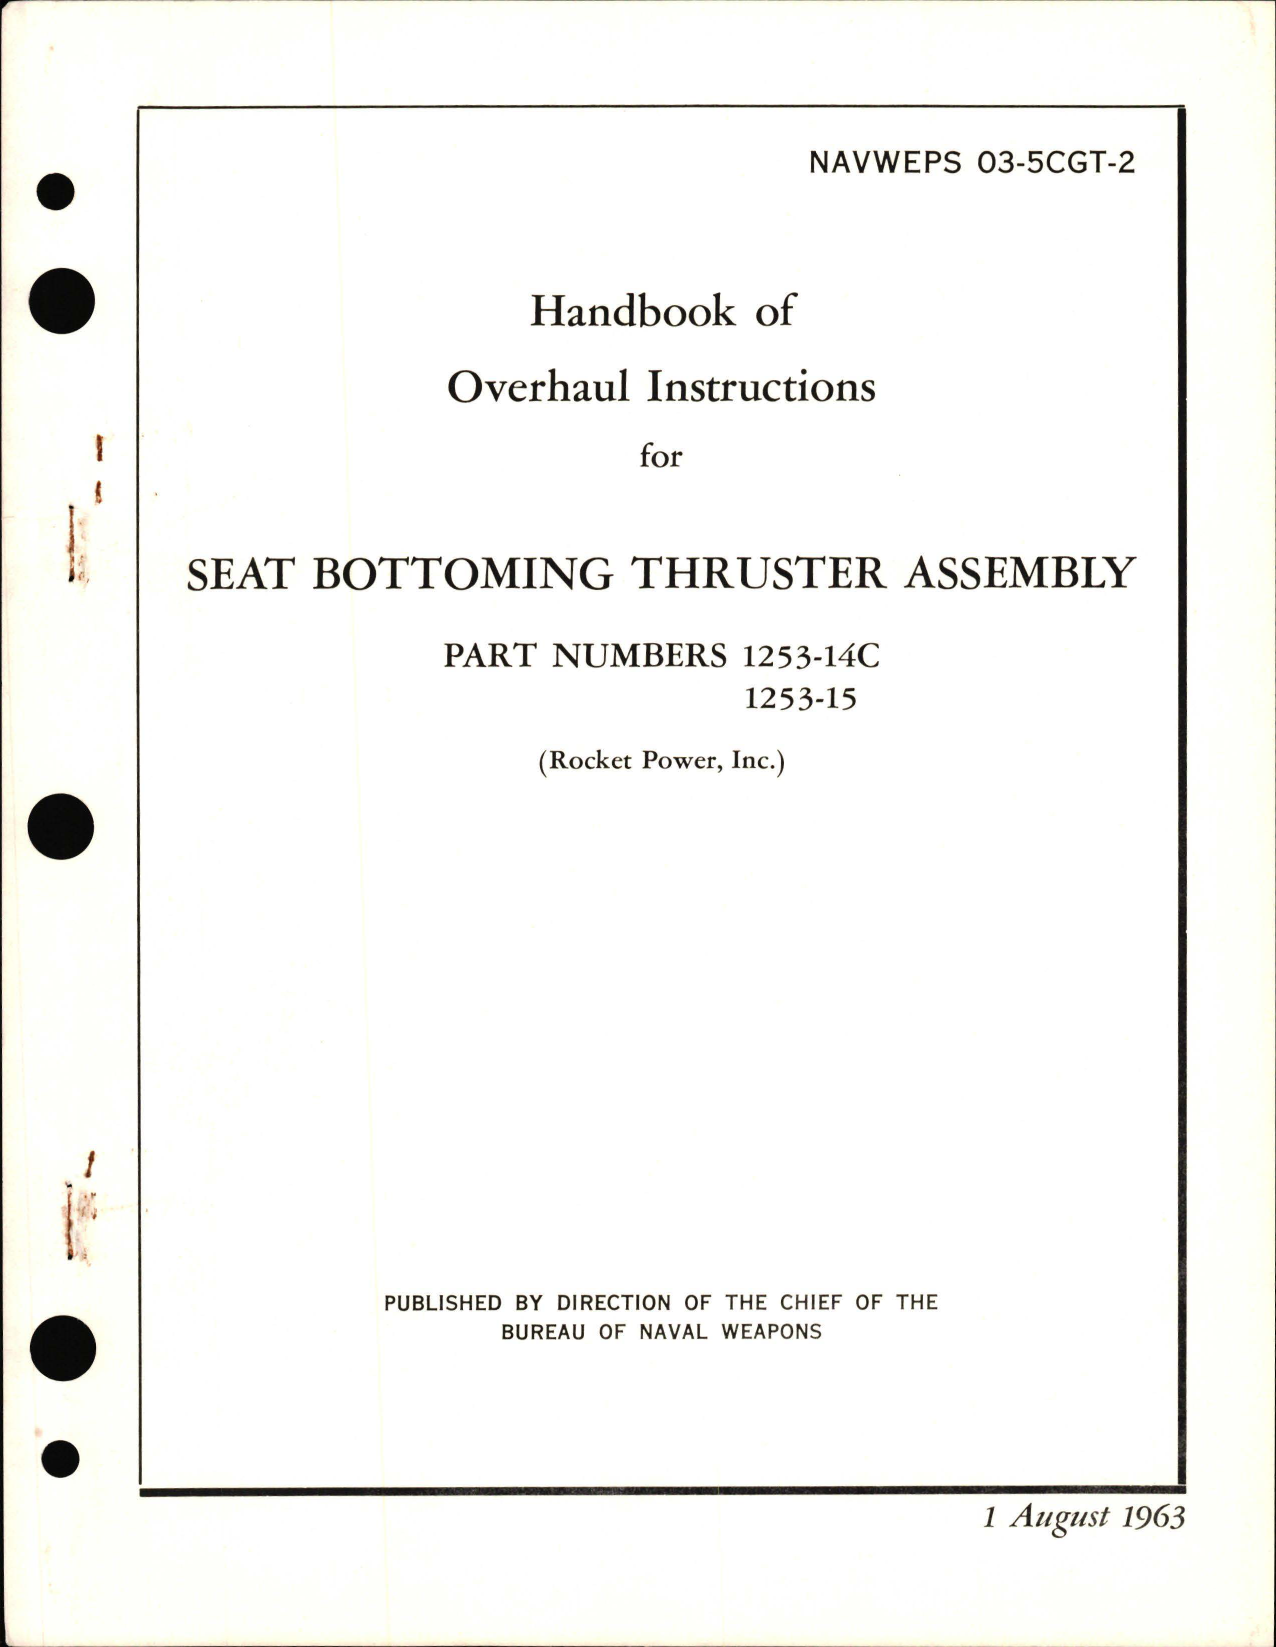 Sample page 1 from AirCorps Library document: Overhaul Instructions for Seat Bottoming Thruster Assembly - Part 1253-14C and 1253-15 